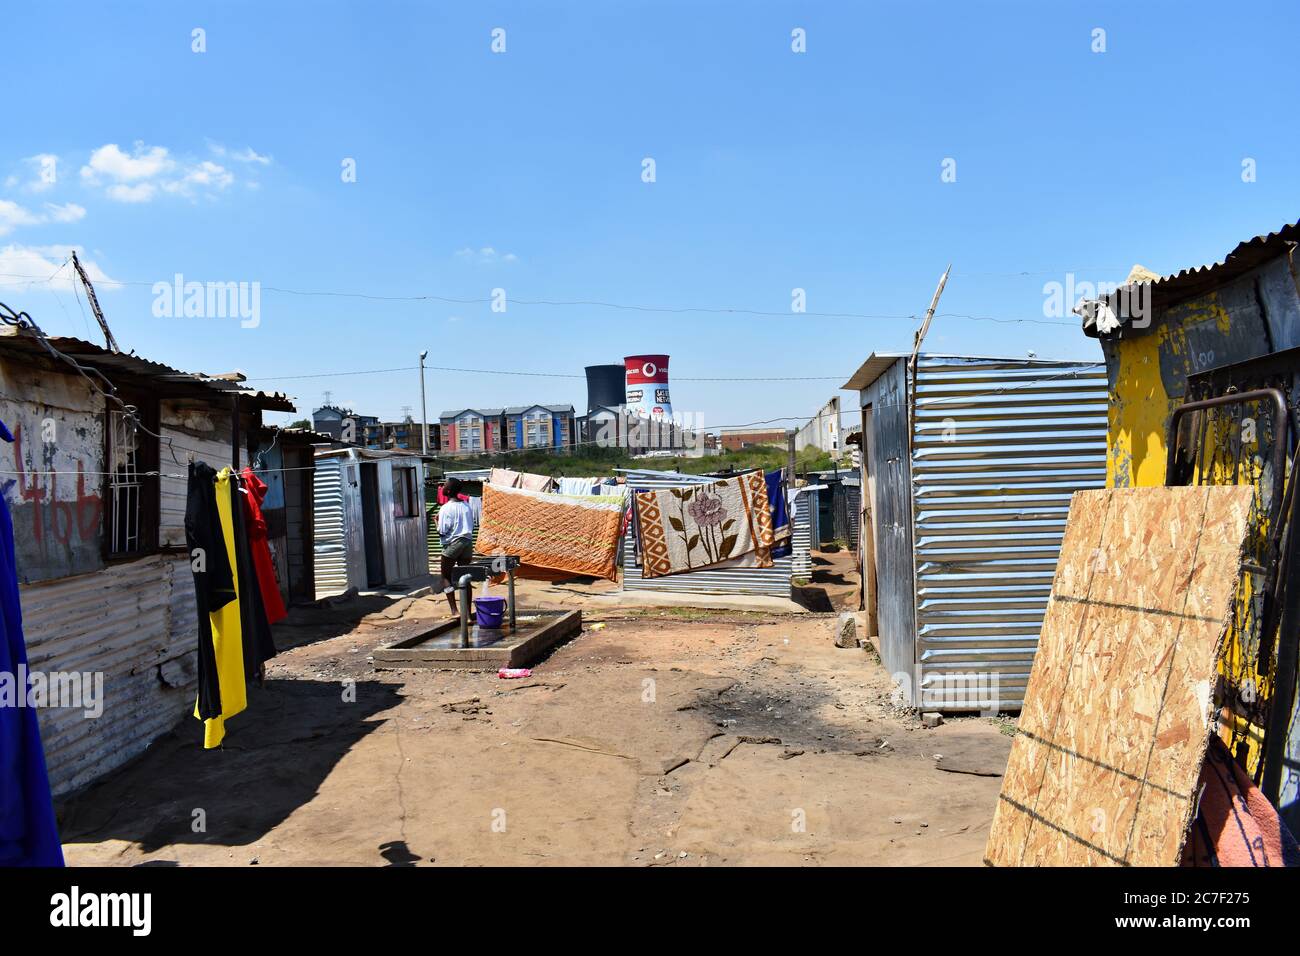 Clothing and bedding drying on the washing line in a slum in Soweto, Johannesburg, South Africa. The Orland Cooling Towers can be seen in the distance Stock Photo